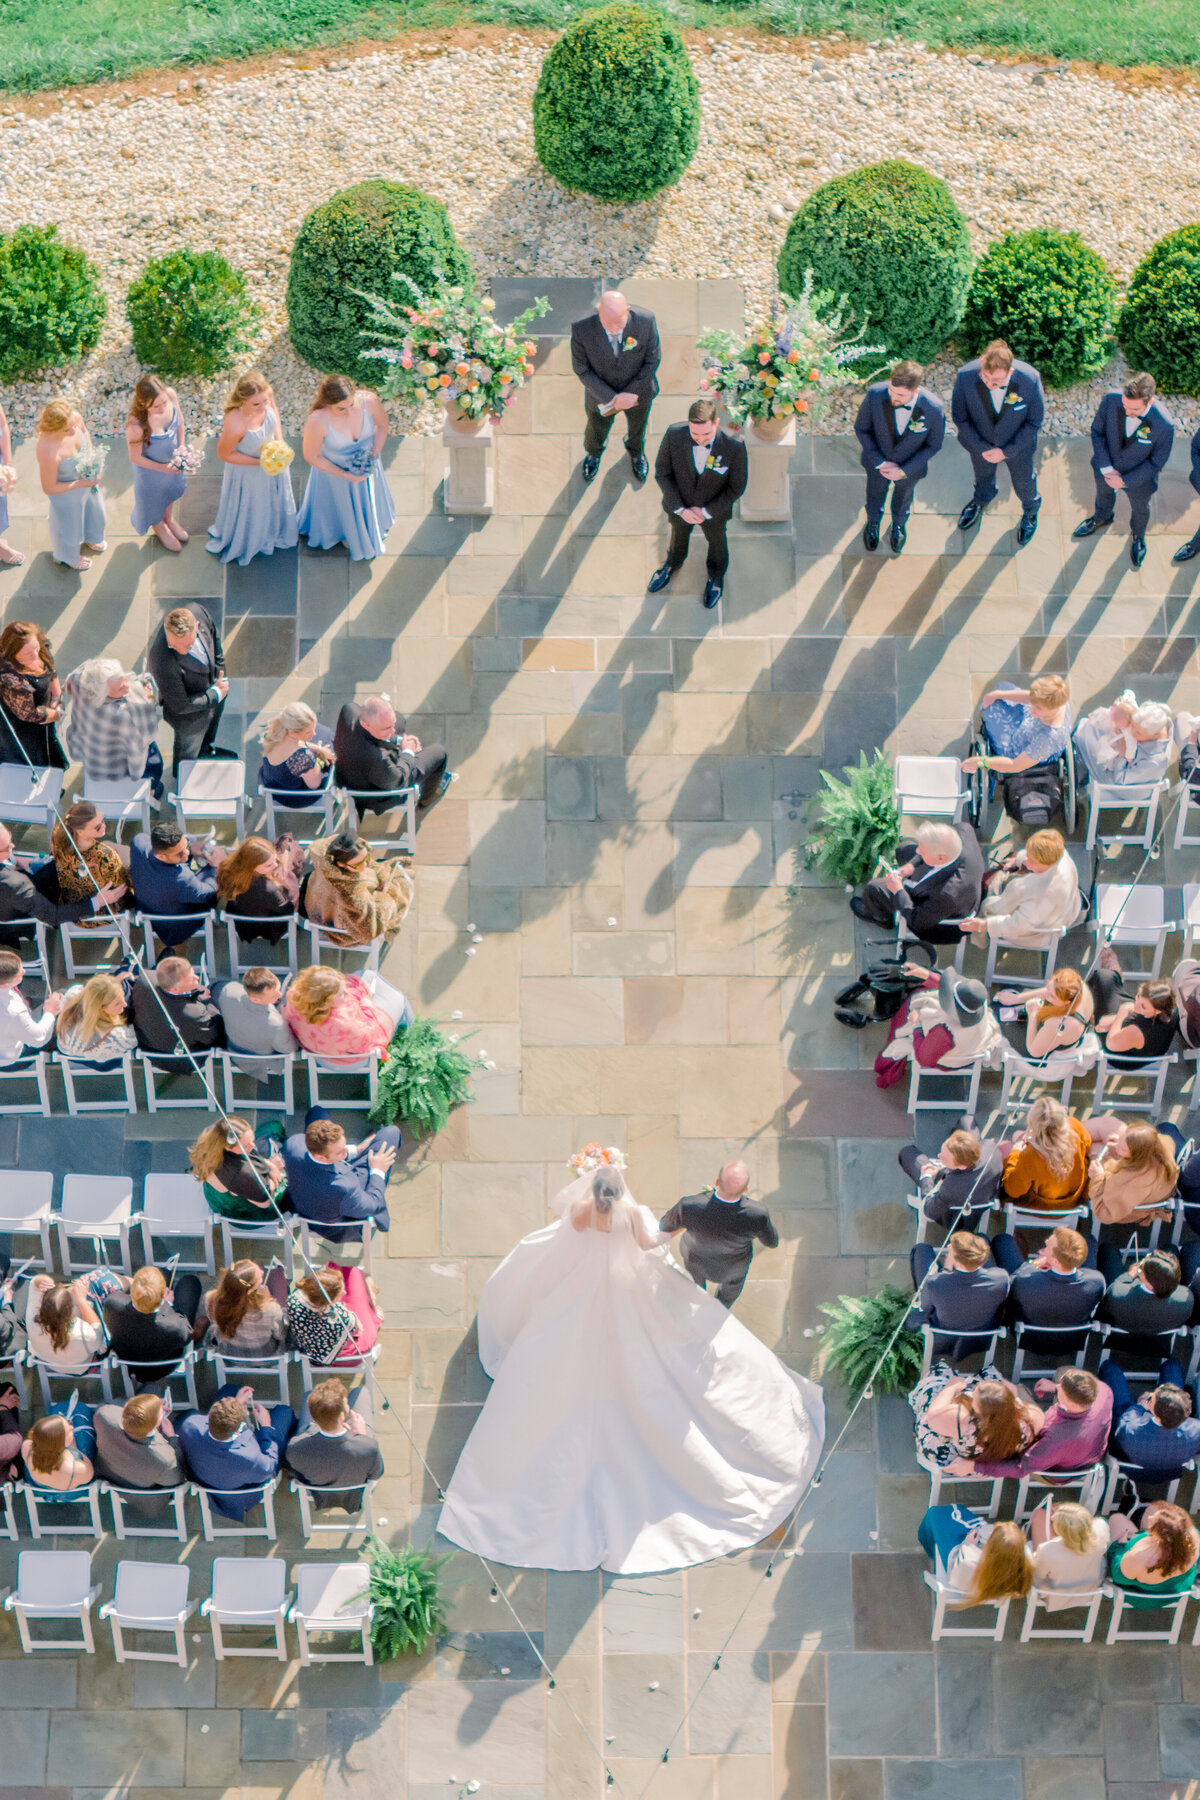 Drone image from above looking down on the father of the bride walking the bride down the aisle